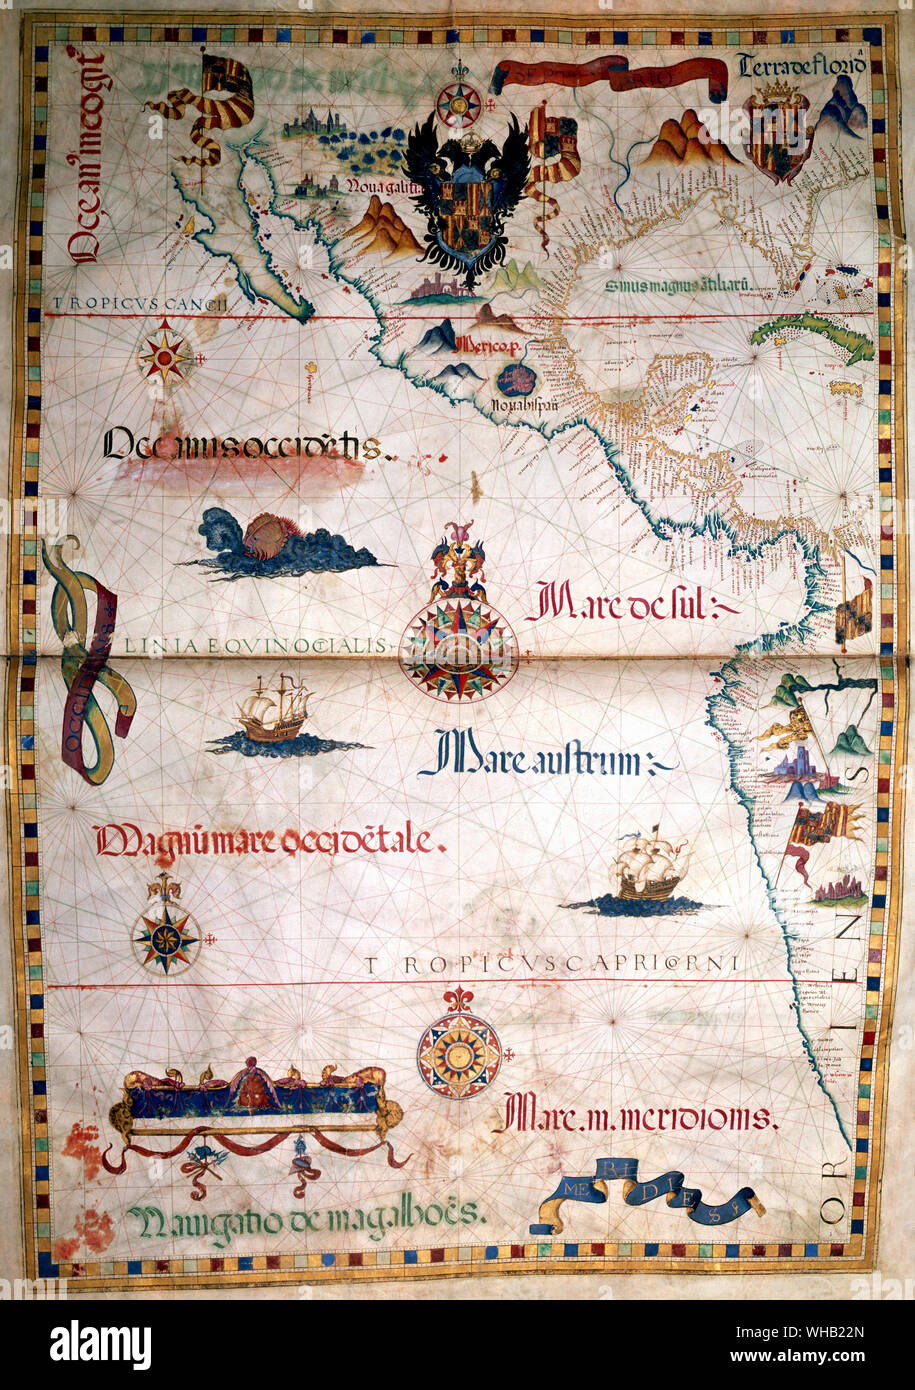 Conquest of Mexico & Peru Completed, Portoland.. Drawn by Diego Homen. from the British Museum. Stock Photo